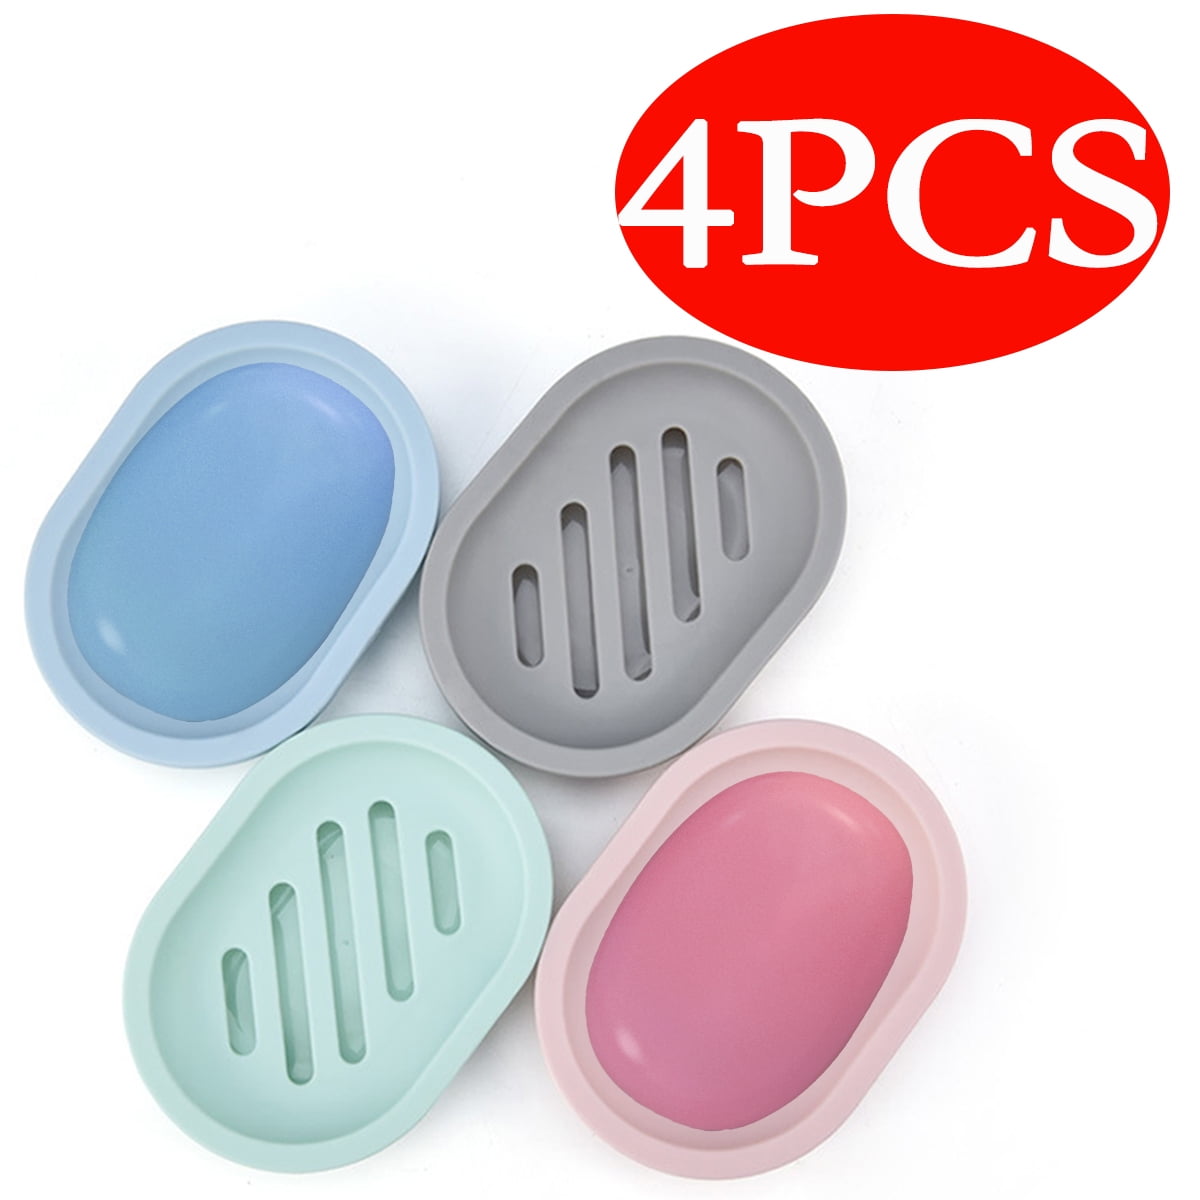 6pcs Bathroom Soap Dishes Dish Silicone Rubber Soap Holder With Dra